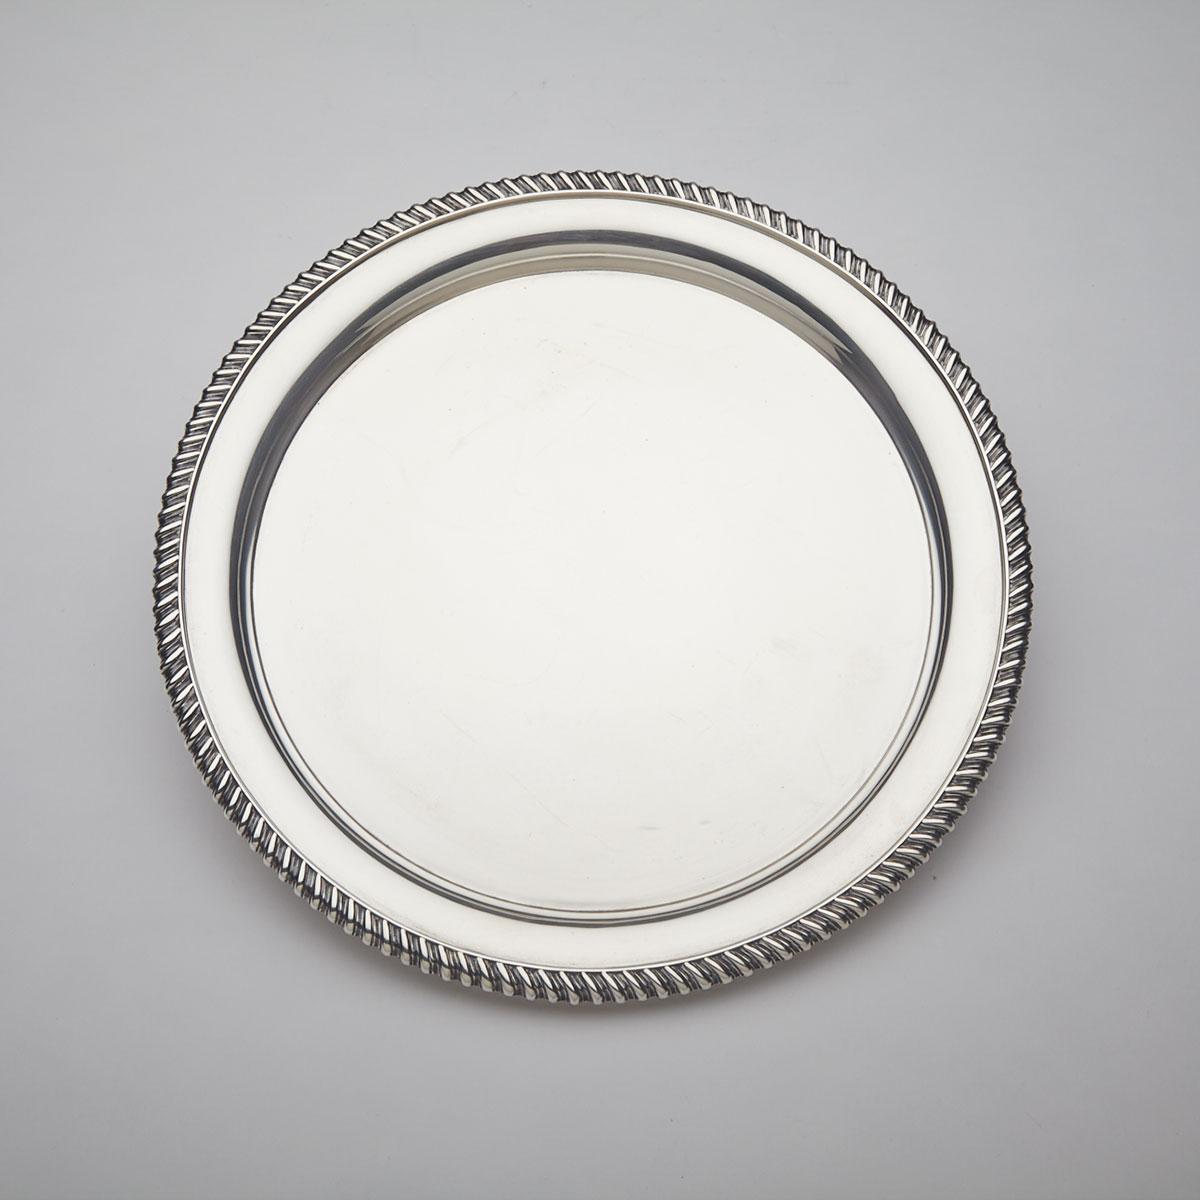 Canadian Silver Circular Waiter, Henry Birks & Sons, Montreal, Que., 1933